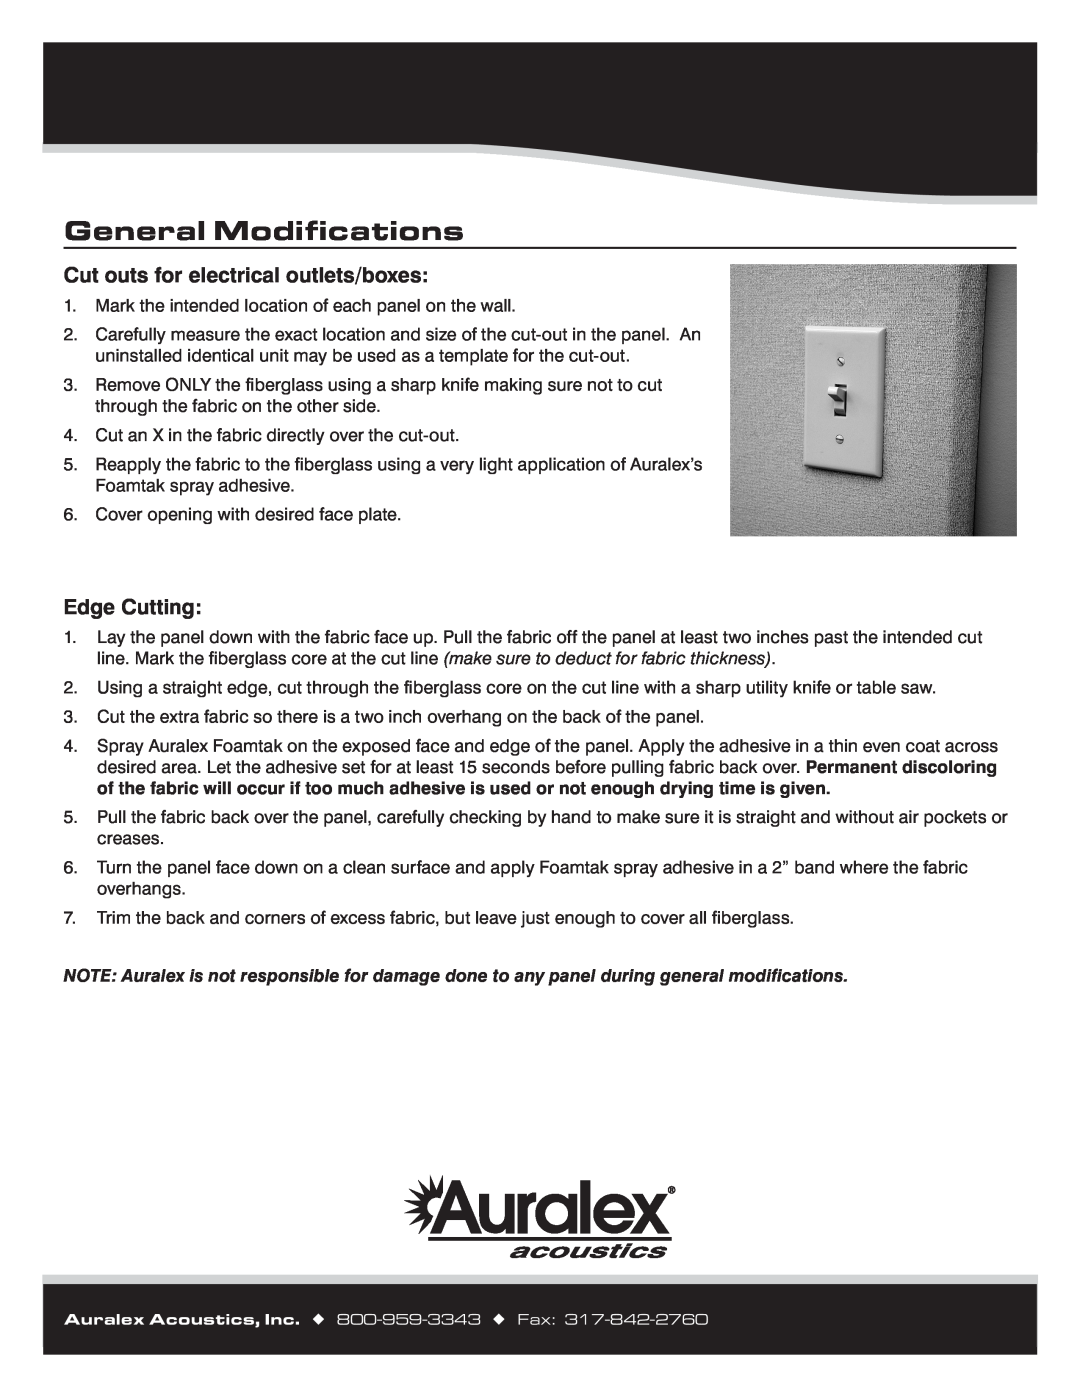 Auralex Acoustics Panels manual General Modifications, Cut outs for electrical outlets/boxes, Edge Cutting 